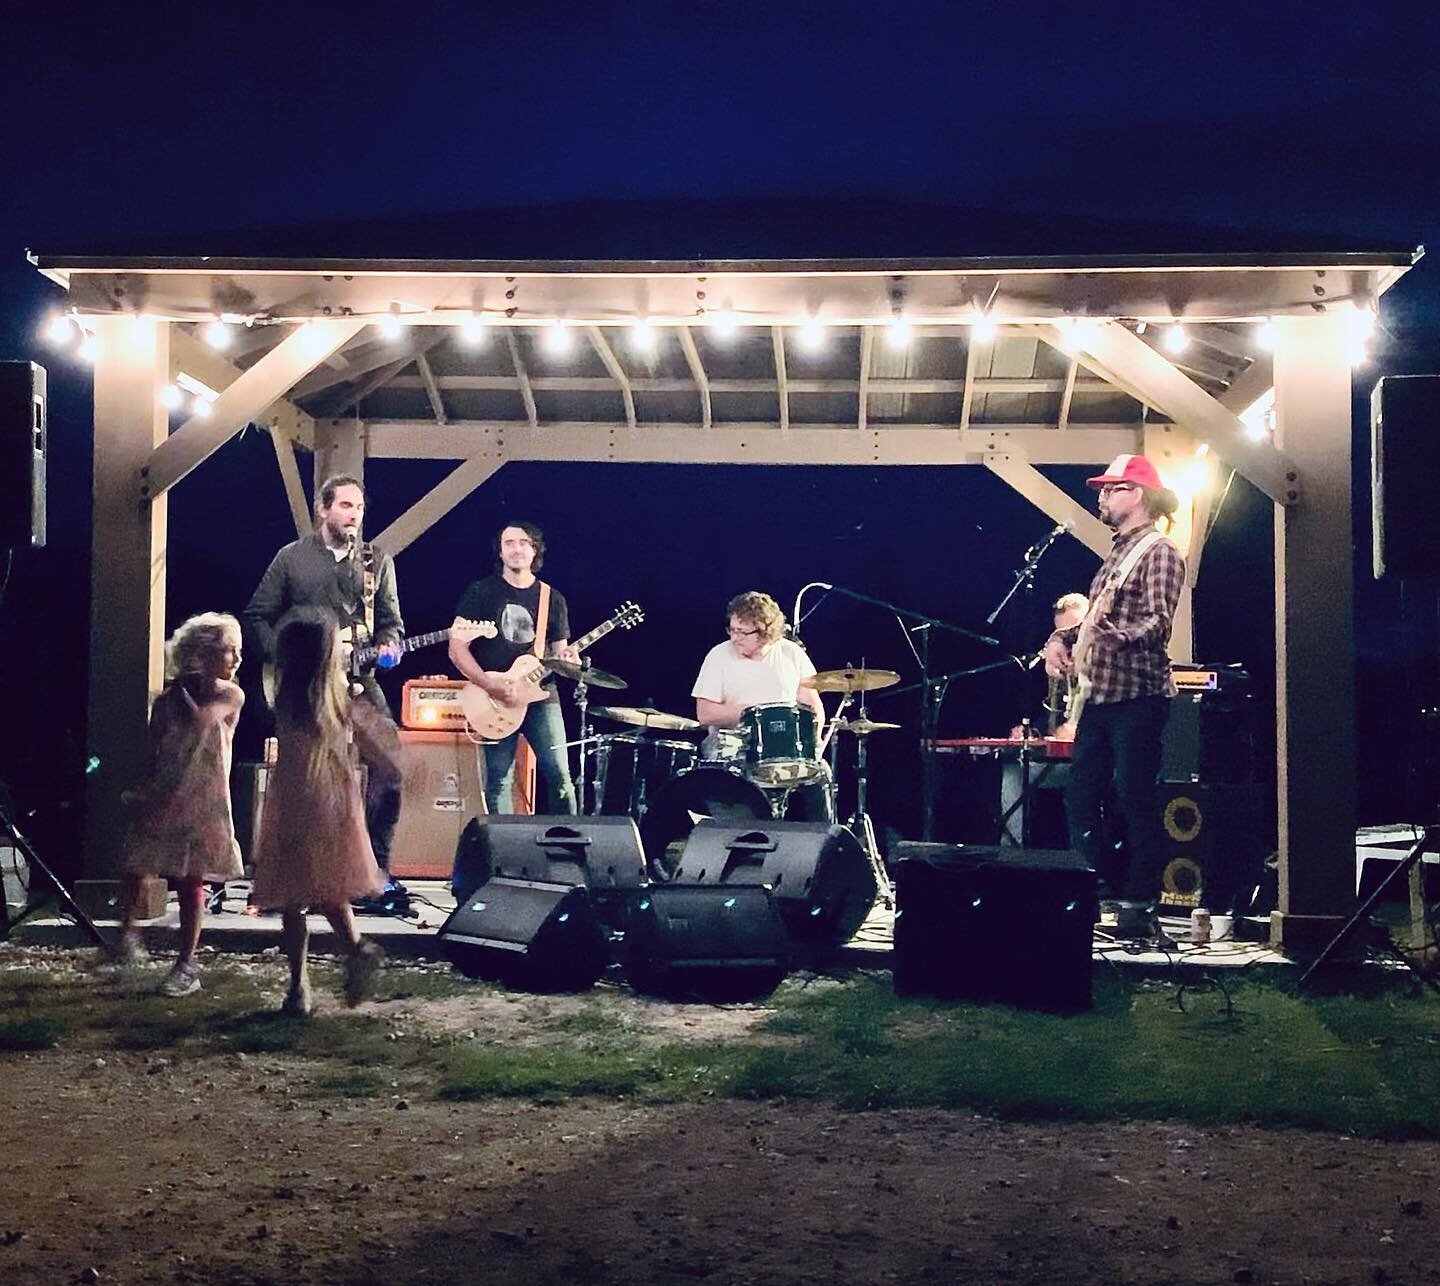 These guys killed it last night and brought so much fun to our annual silver harbour marina &ldquo;pig roast&rdquo; as a thank you to our patrons! Things looked a whole lot different this year due to the restrictions in place but everyone still had a